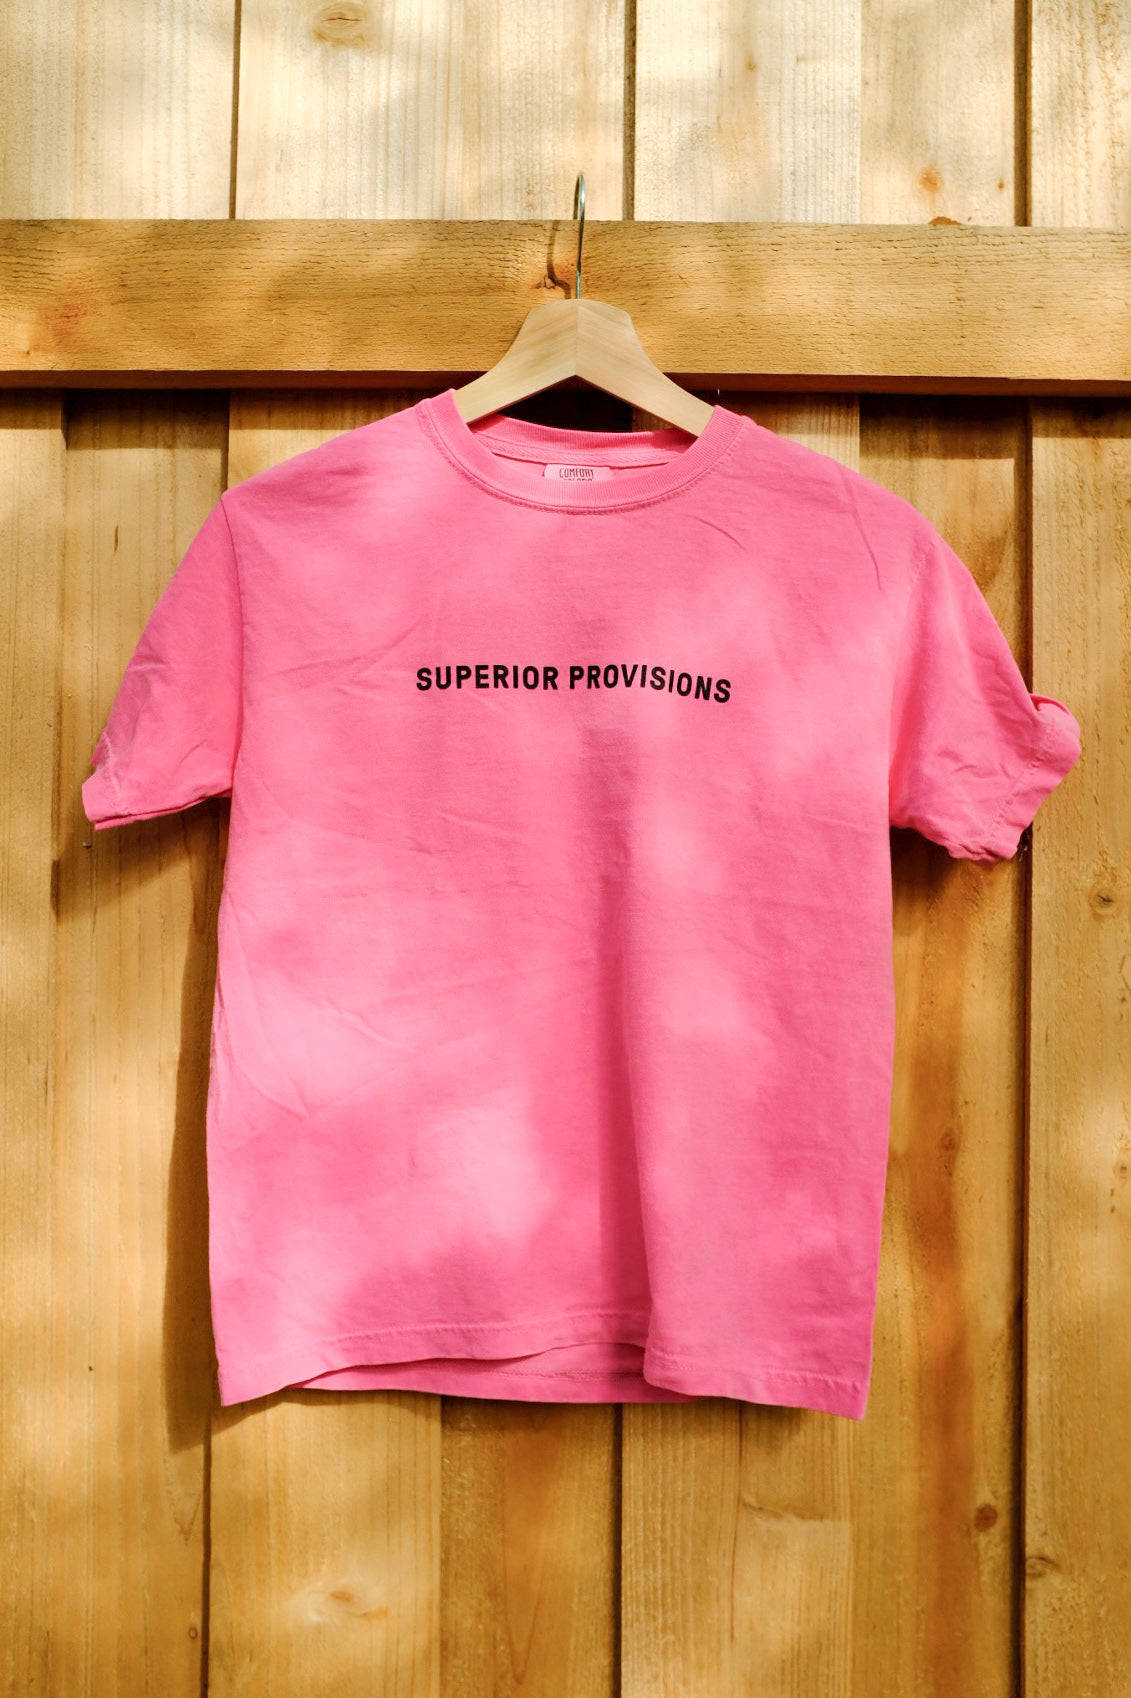 Front view of a pink t-shirt that has "Superior Provisions" printed in black. The shirt is hanging from a wooden hanger in front of a wooden fence.